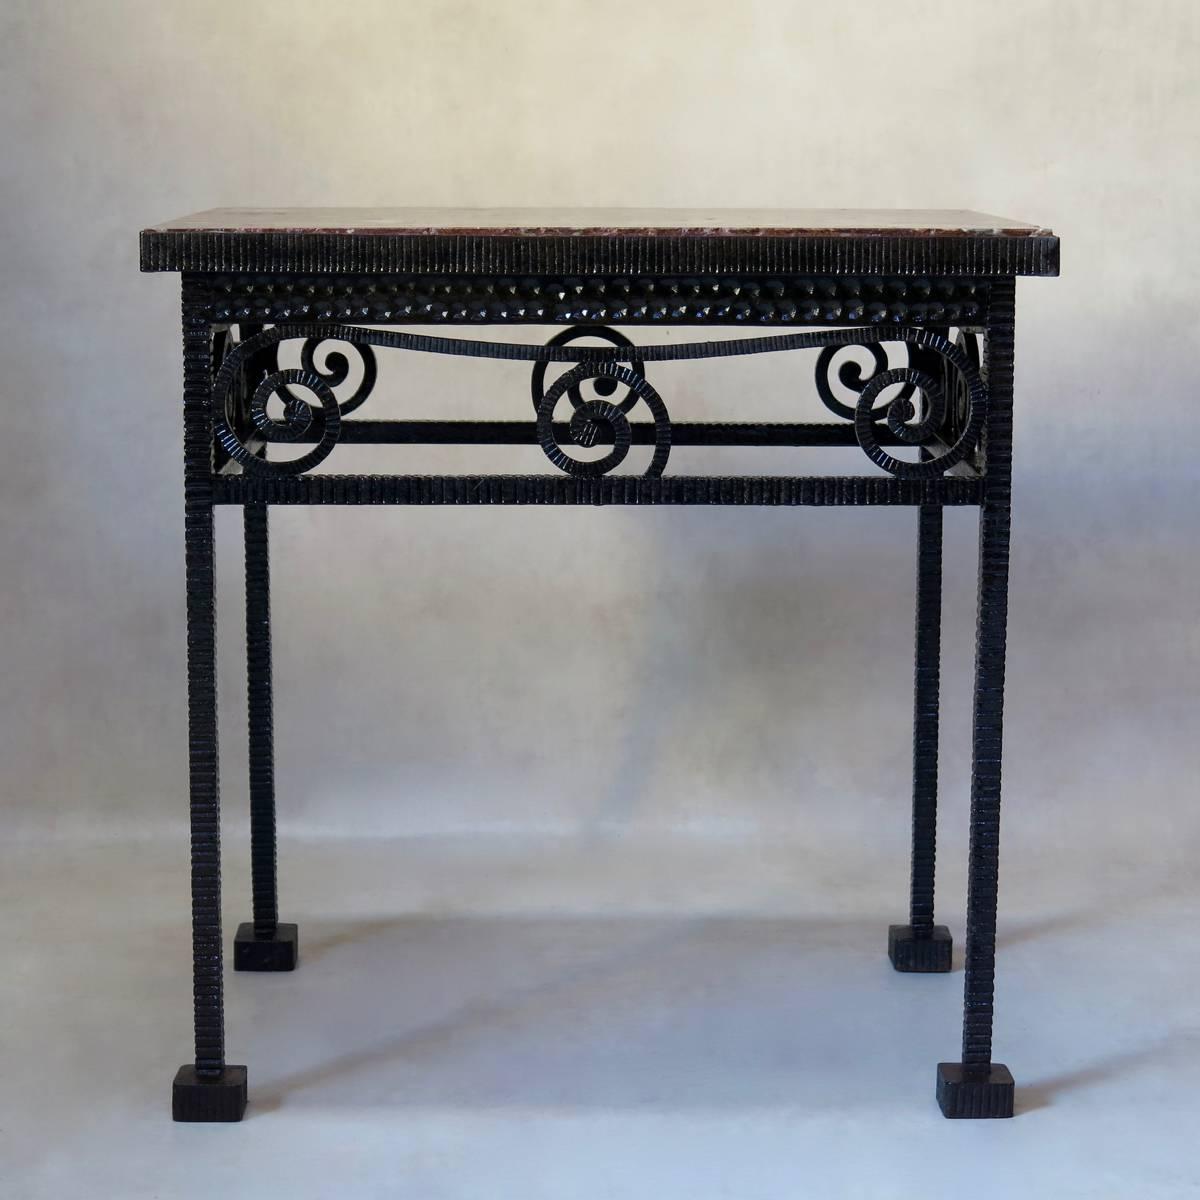 Unusual French, 1930s table with a heavy, hammered iron structure. The ironwork is patterned all over with a ridged effect, except for the apron, which has a decor of small imprinted dots. Curlicue motif on apron. Raised on slender square legs,